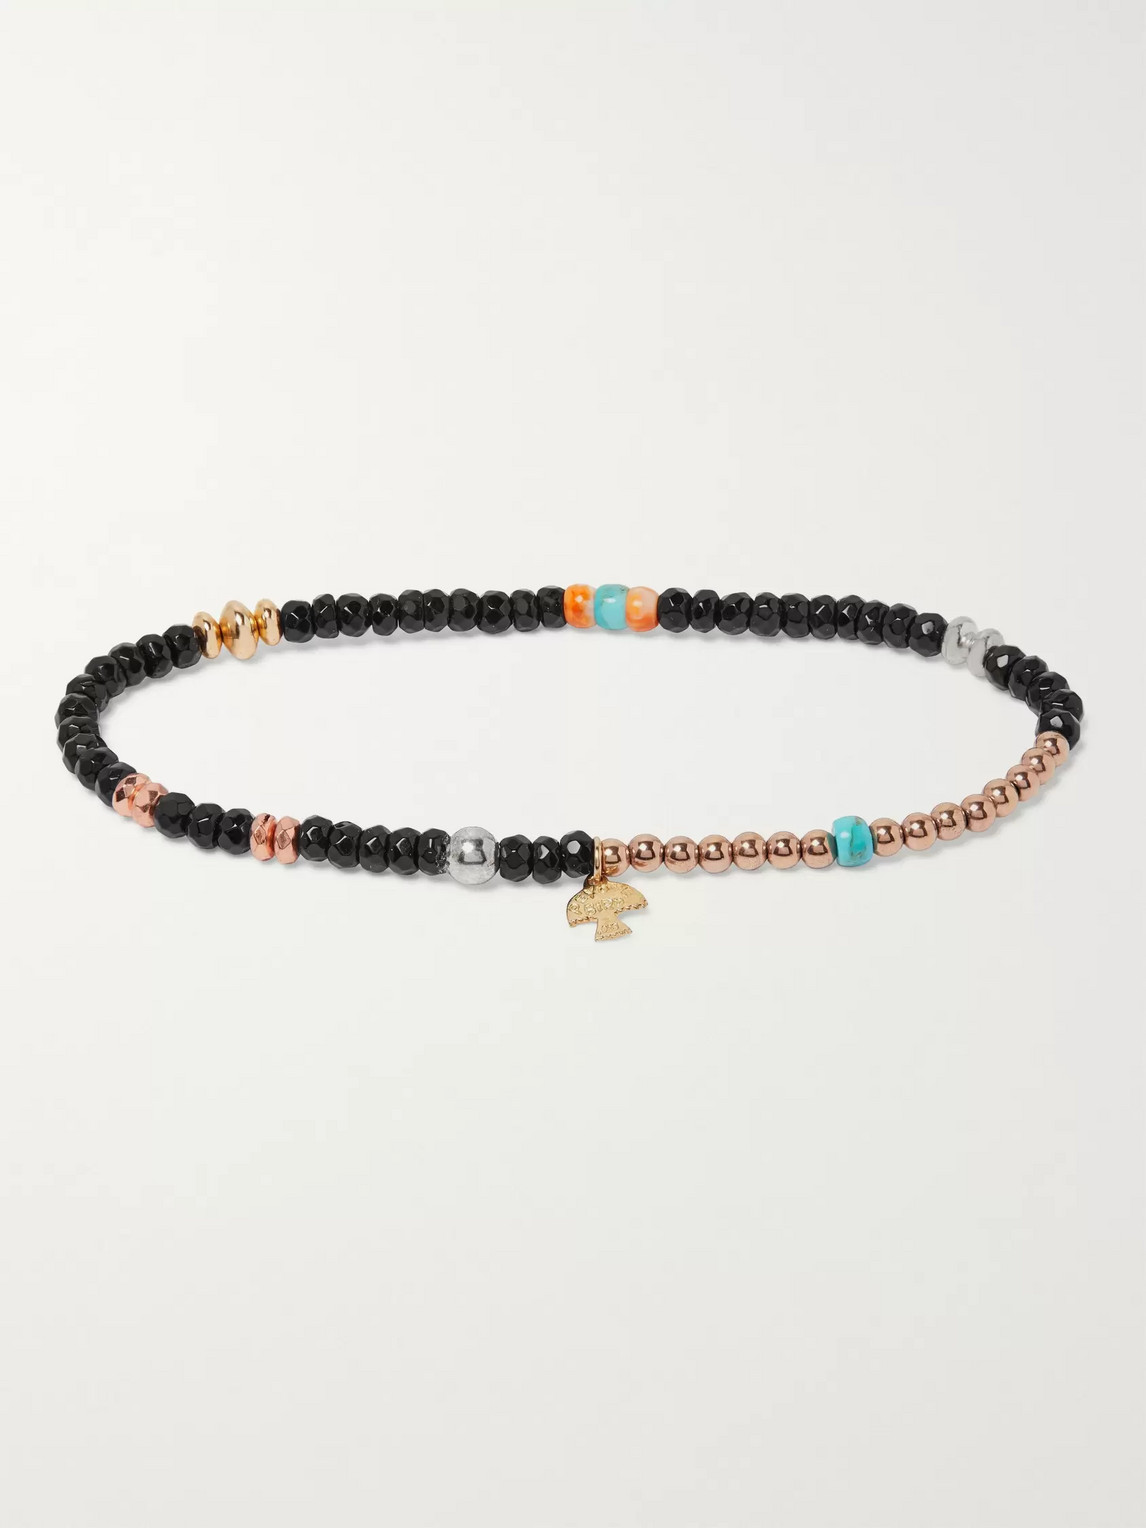 Peyote Bird Onyx, Turquoise, Oyster, Sterling Silver And Gold-fill Bracelet In Black